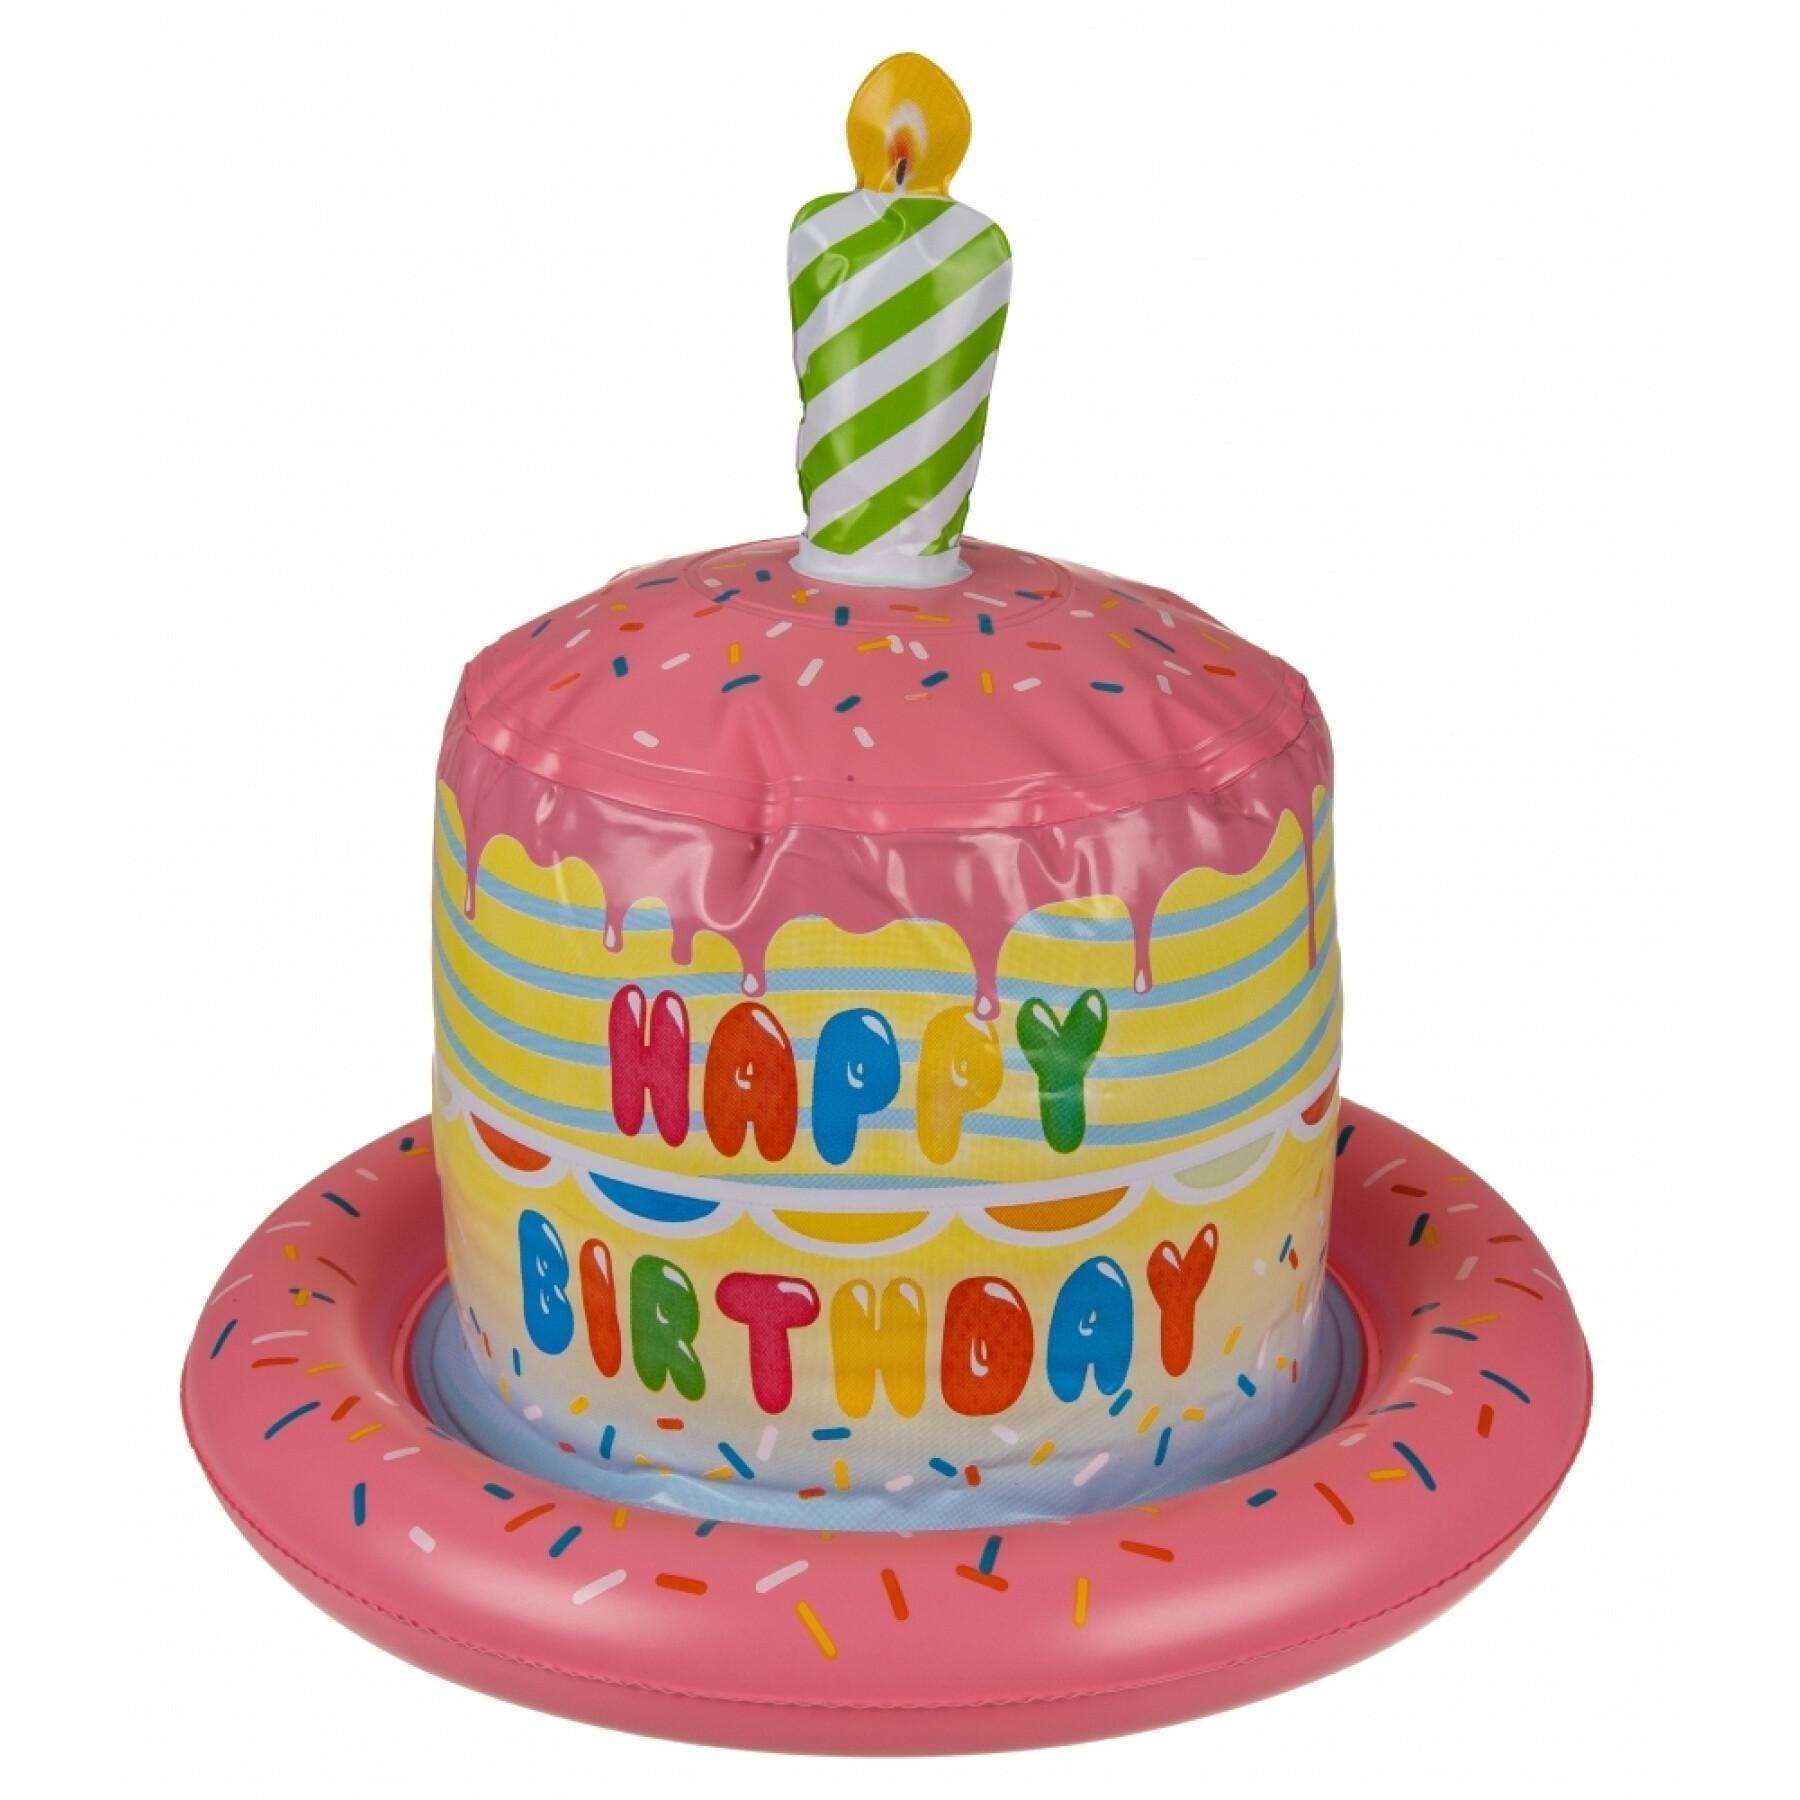 Inflatable hat birthday cake for kids OOTB